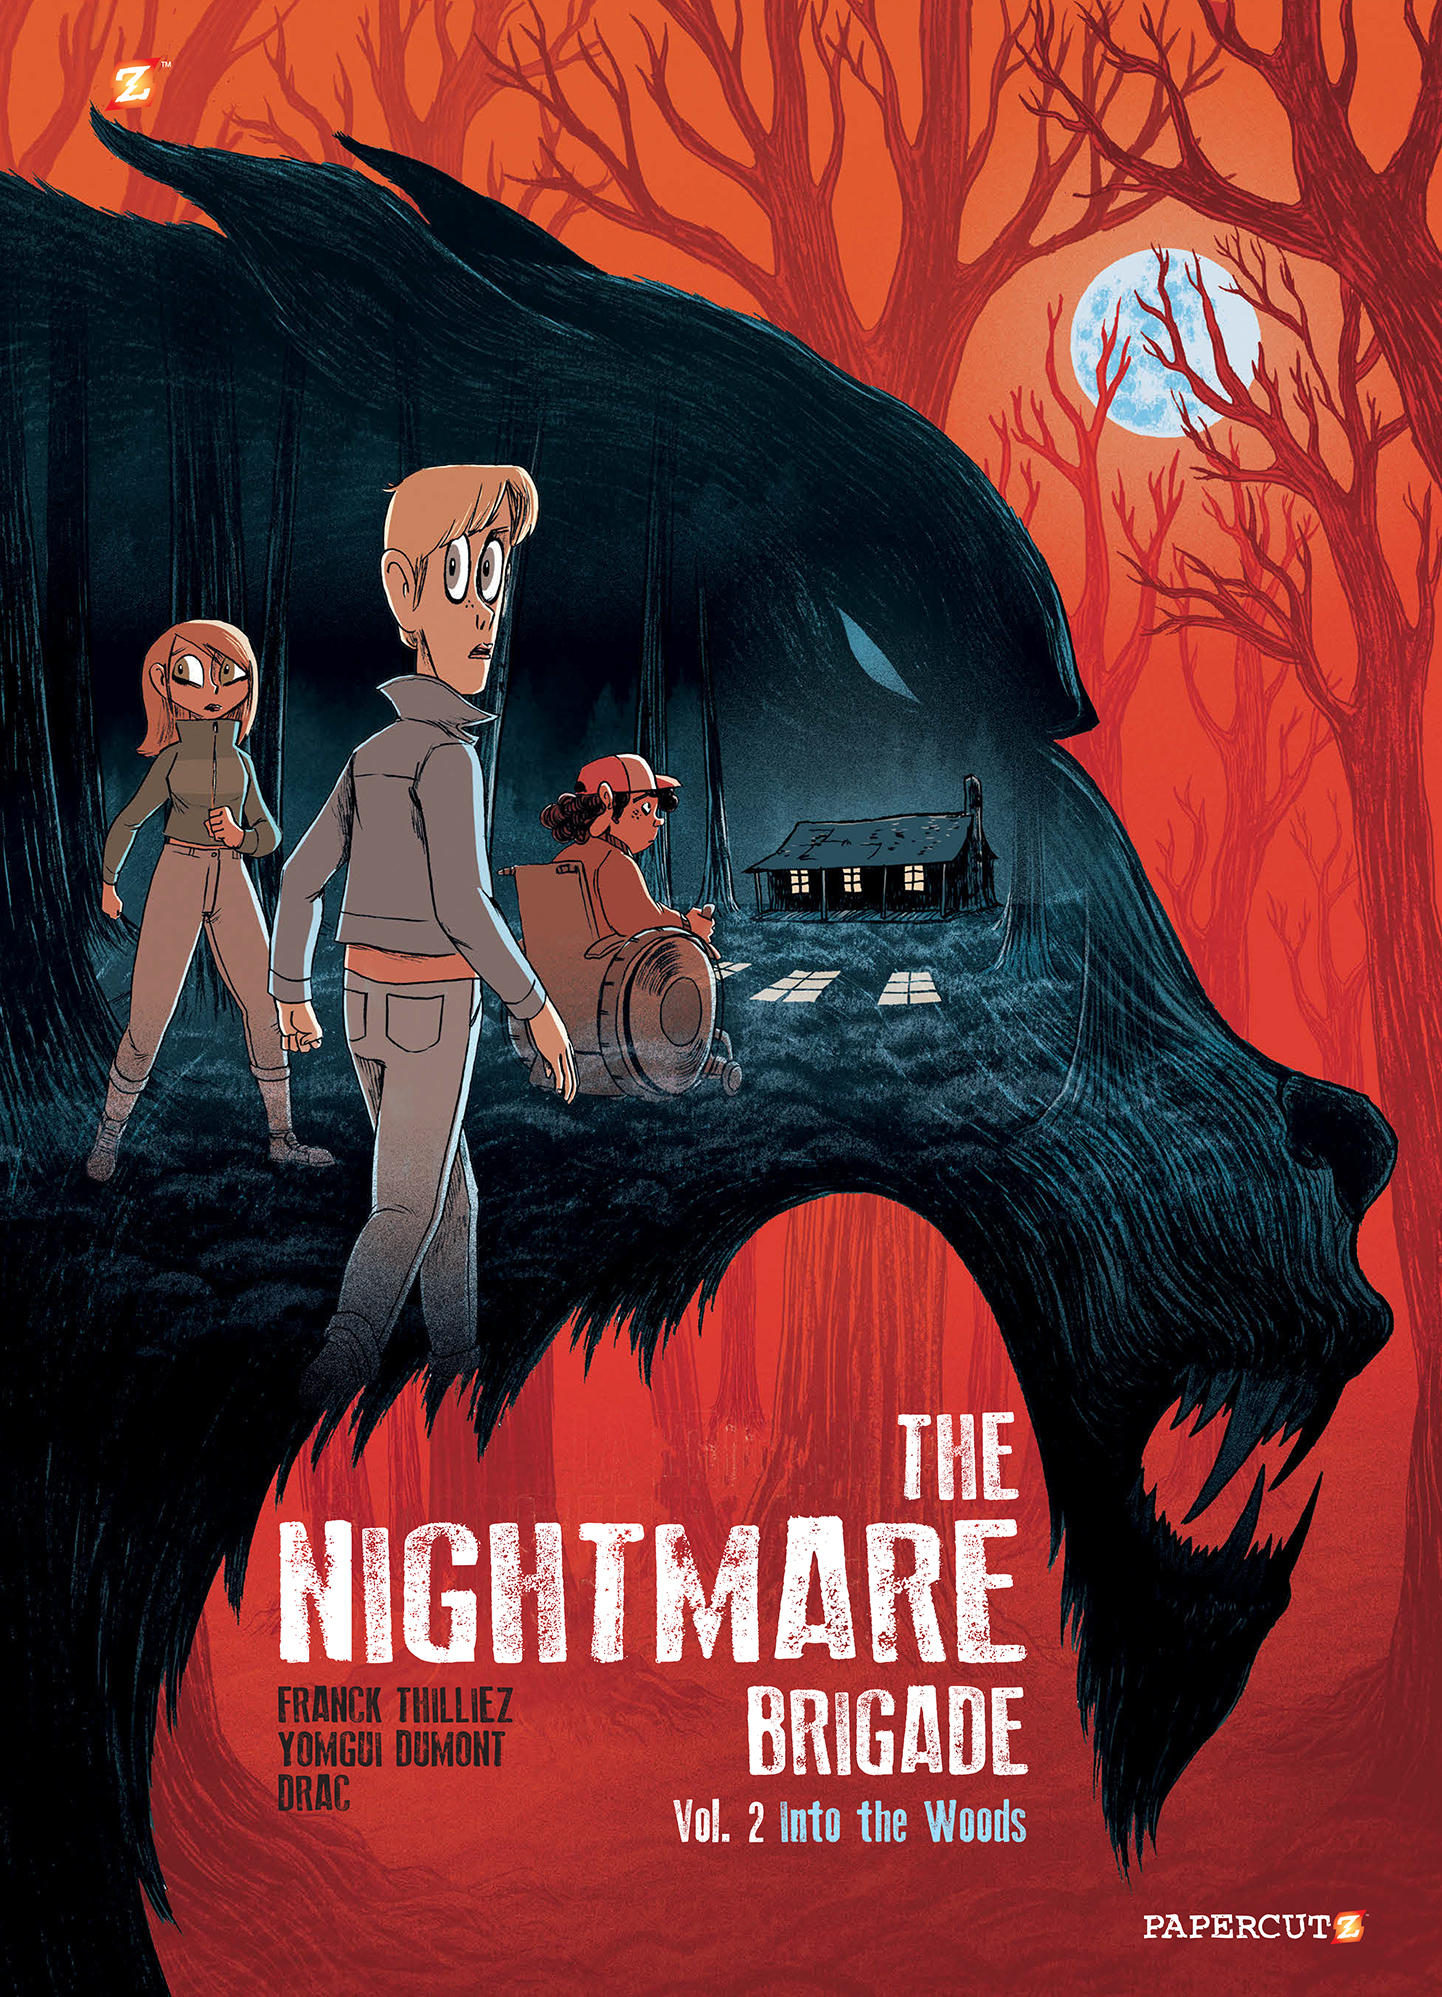 Read online The Nightmare Brigade comic -  Issue # TPB 2 - 1